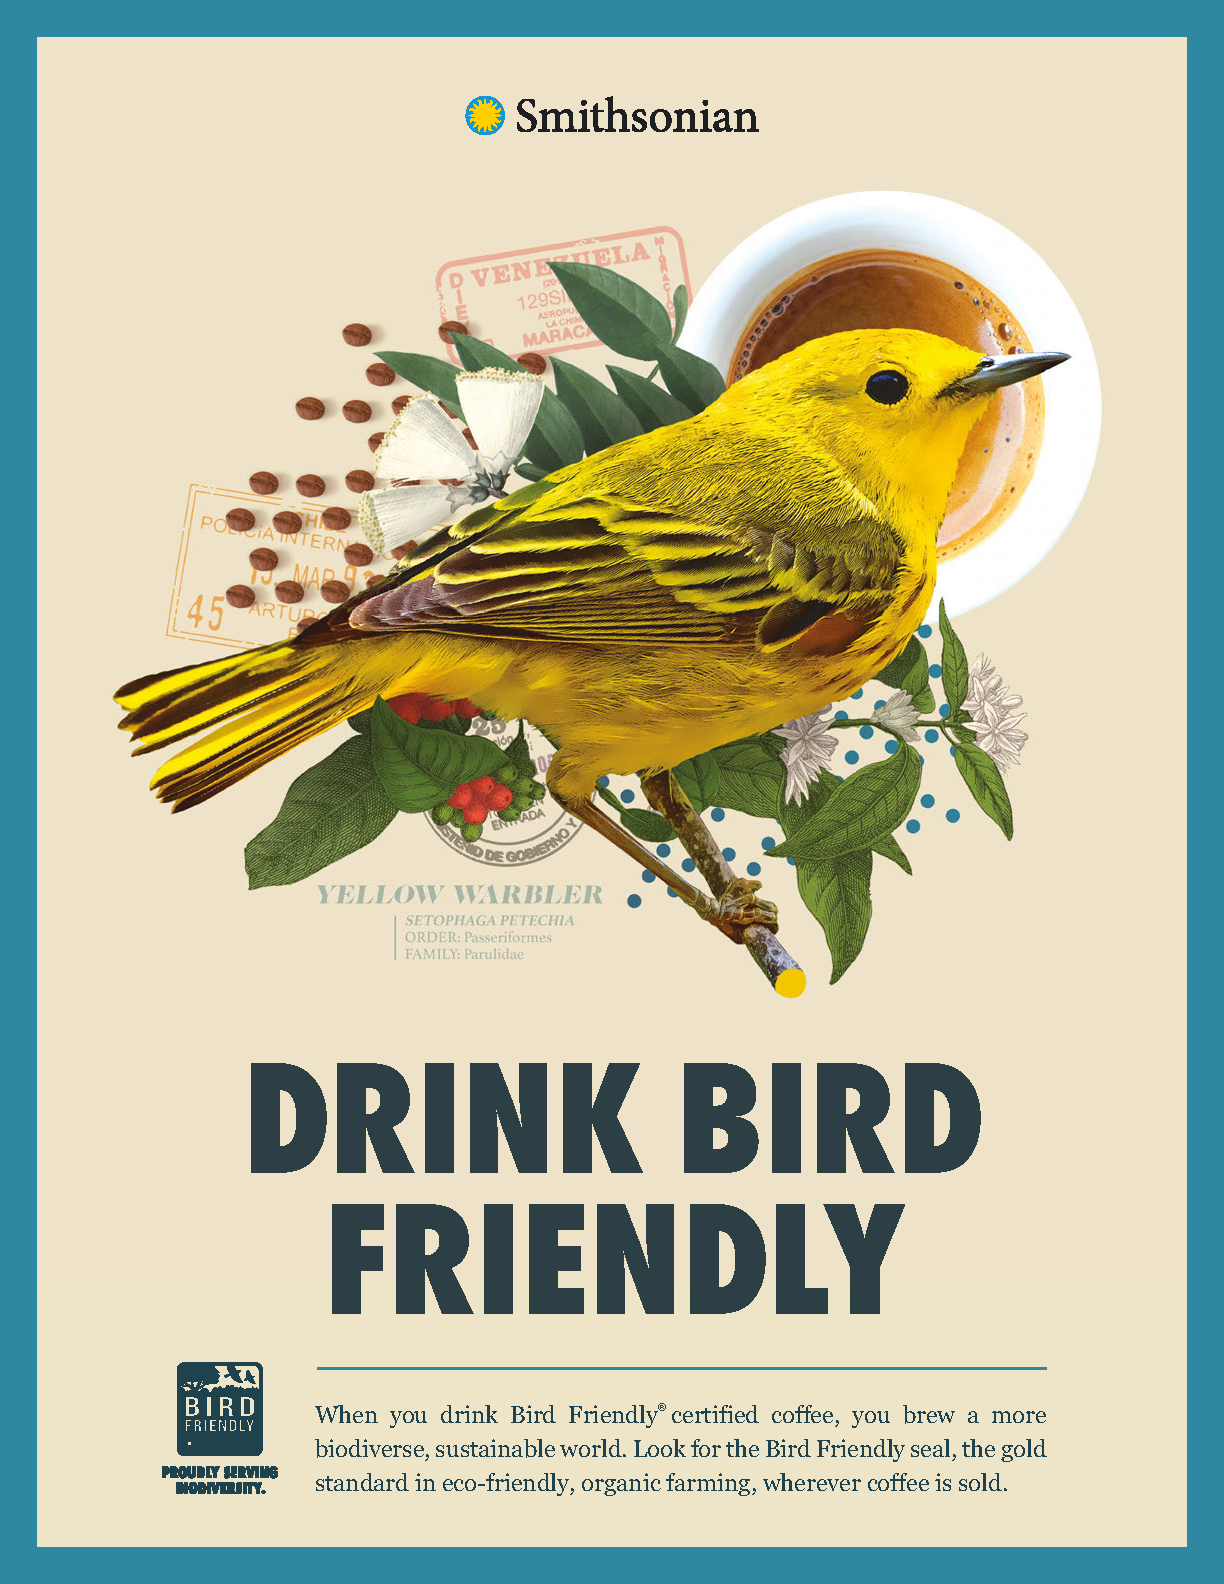 A Bird Friendly Coffee flyer with the text "Drink Bird Friendly. When you drink Bird Friendly certified coffee, you brew a more biodiverse, sustainable world. Look for the Bird Friendly seal, the gold standard in eco-friendly, organic farming"